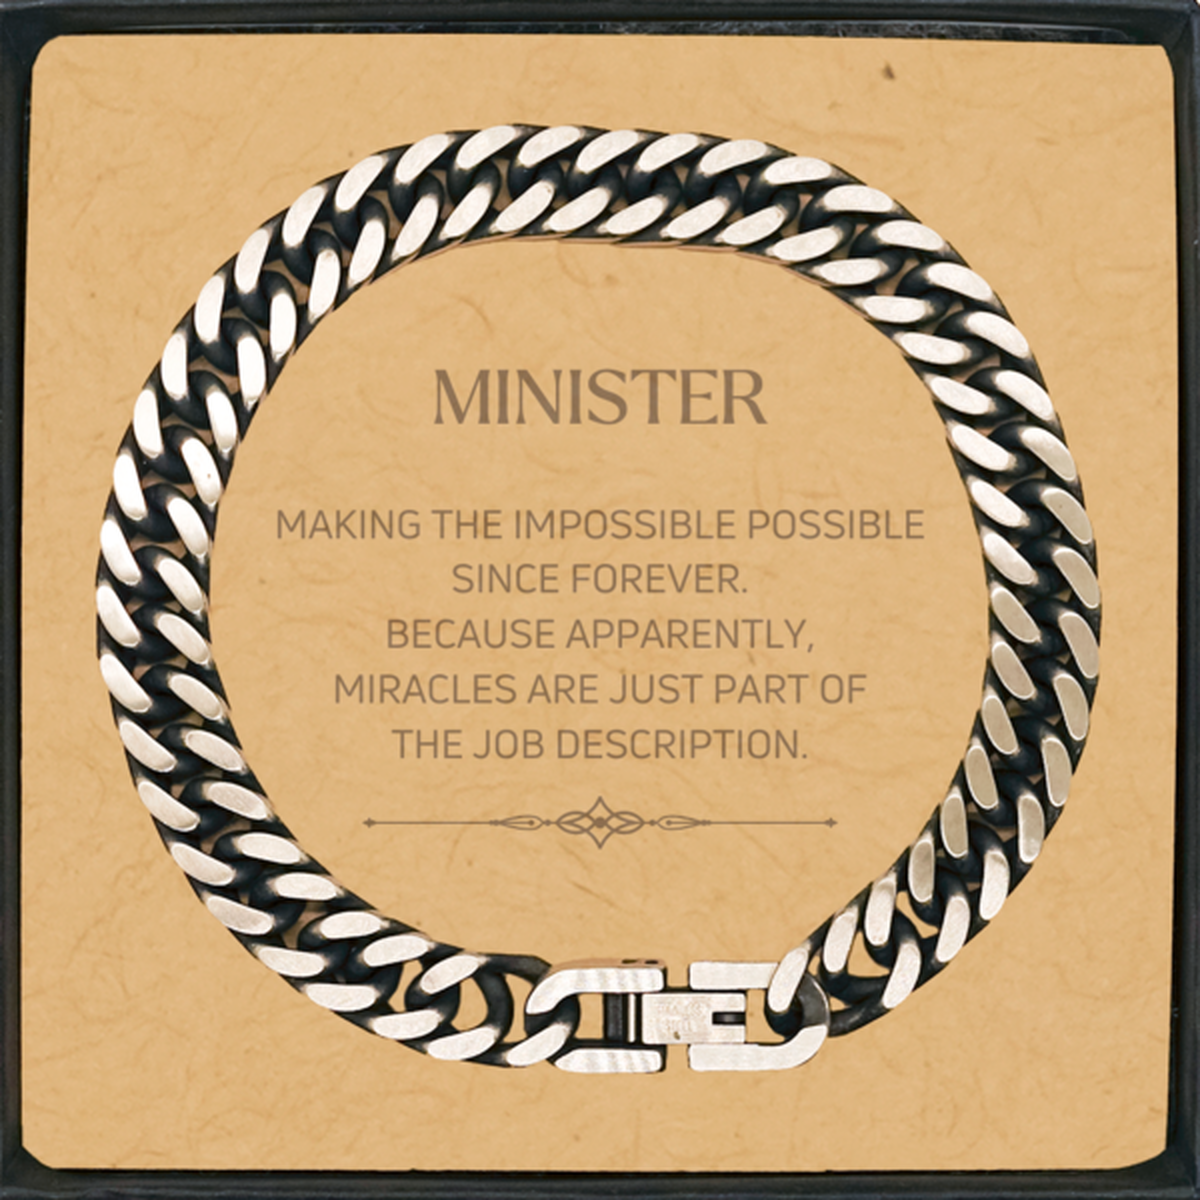 Funny Minister Gifts, Miracles are just part of the job description, Inspirational Birthday Cuban Link Chain Bracelet For Minister, Men, Women, Coworkers, Friends, Boss